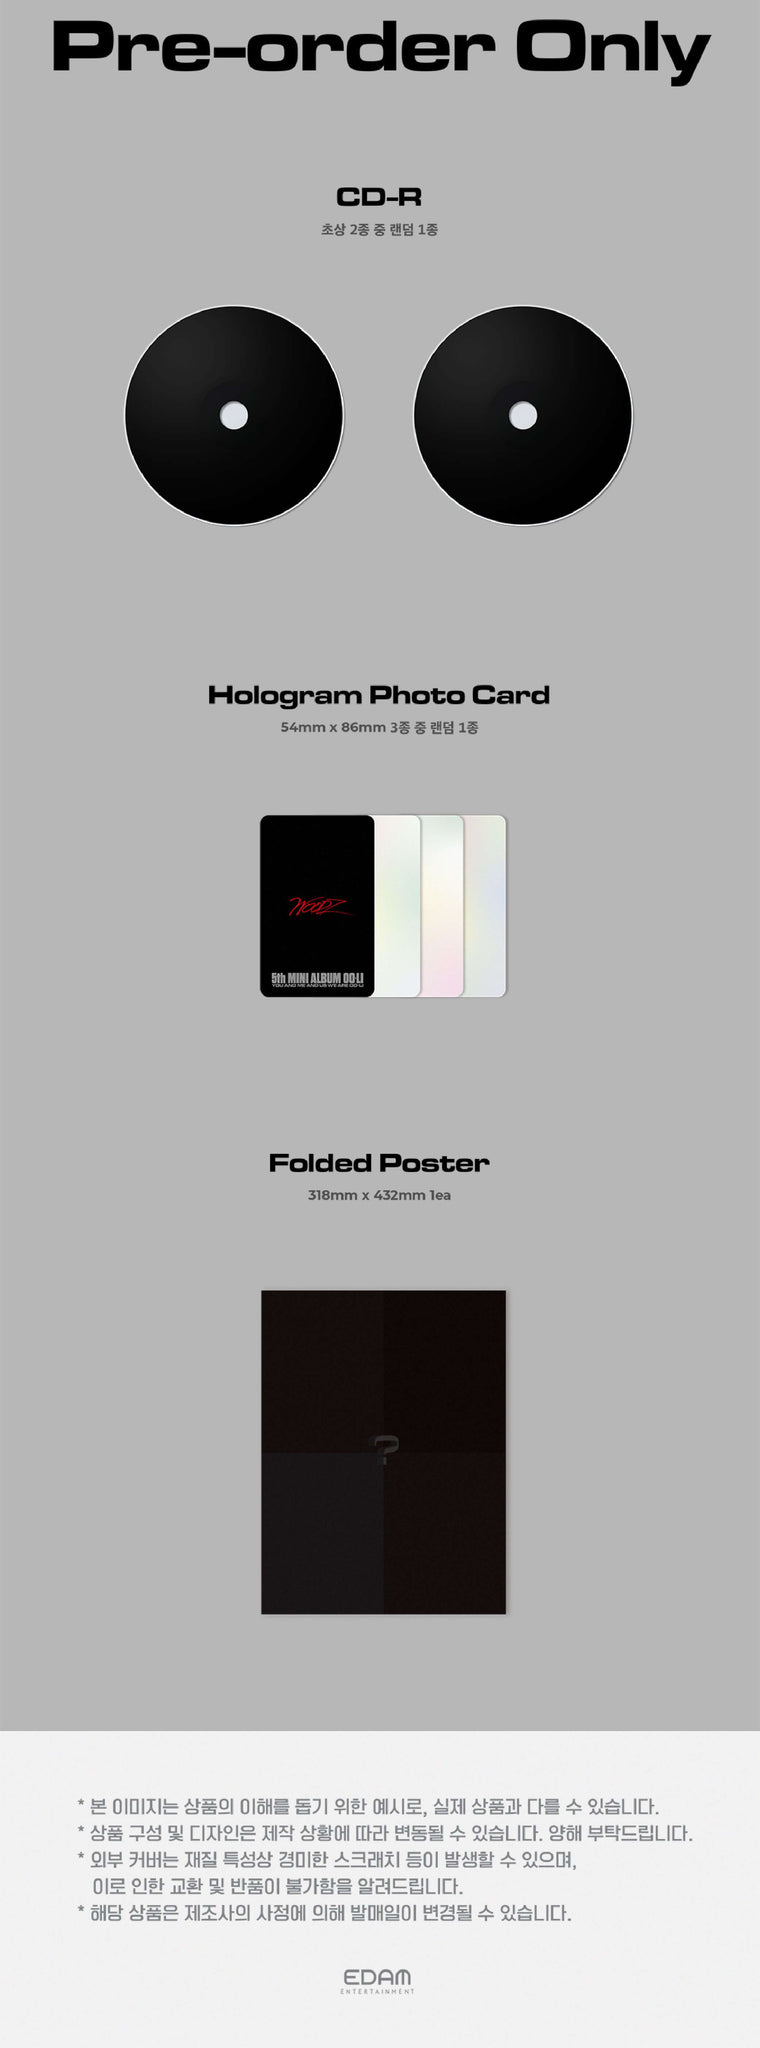 WOODZ OO-LI - CONTROL Version Inclusions Pre-order Only CD Hologram Photocard Folded Poster